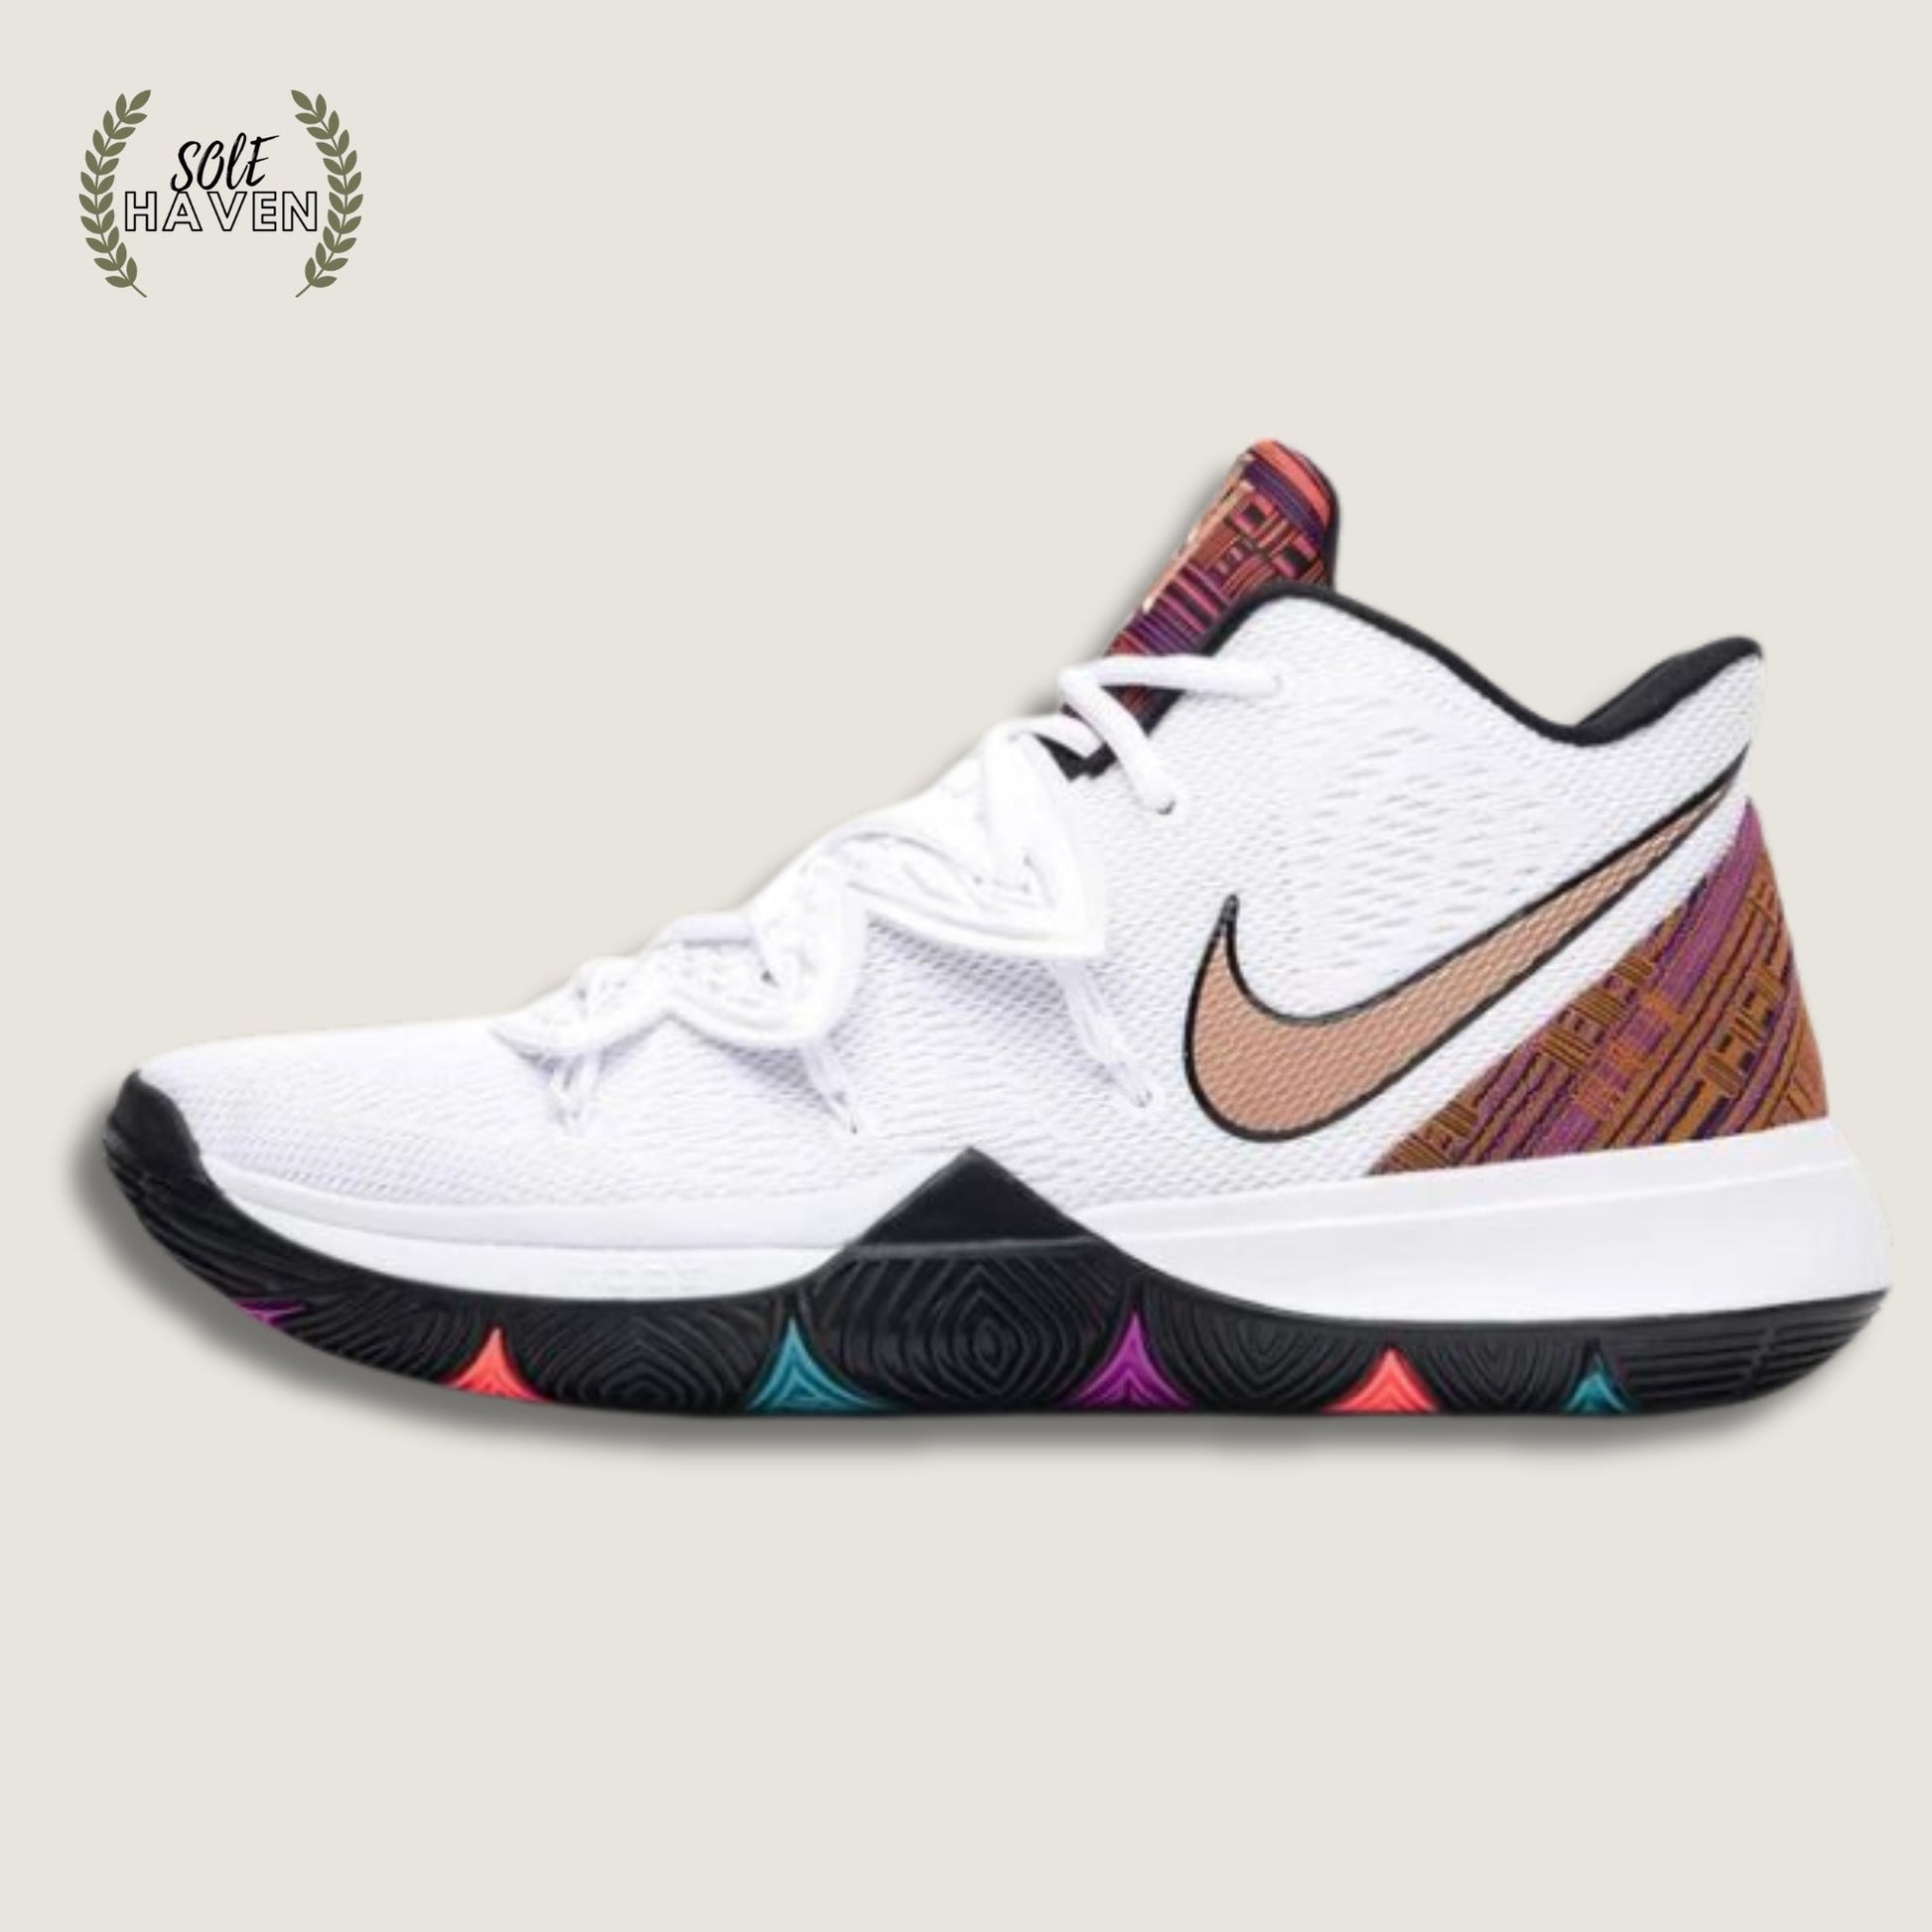 Kyrie 5 'Black History Month' - Sole HavenShoesNike